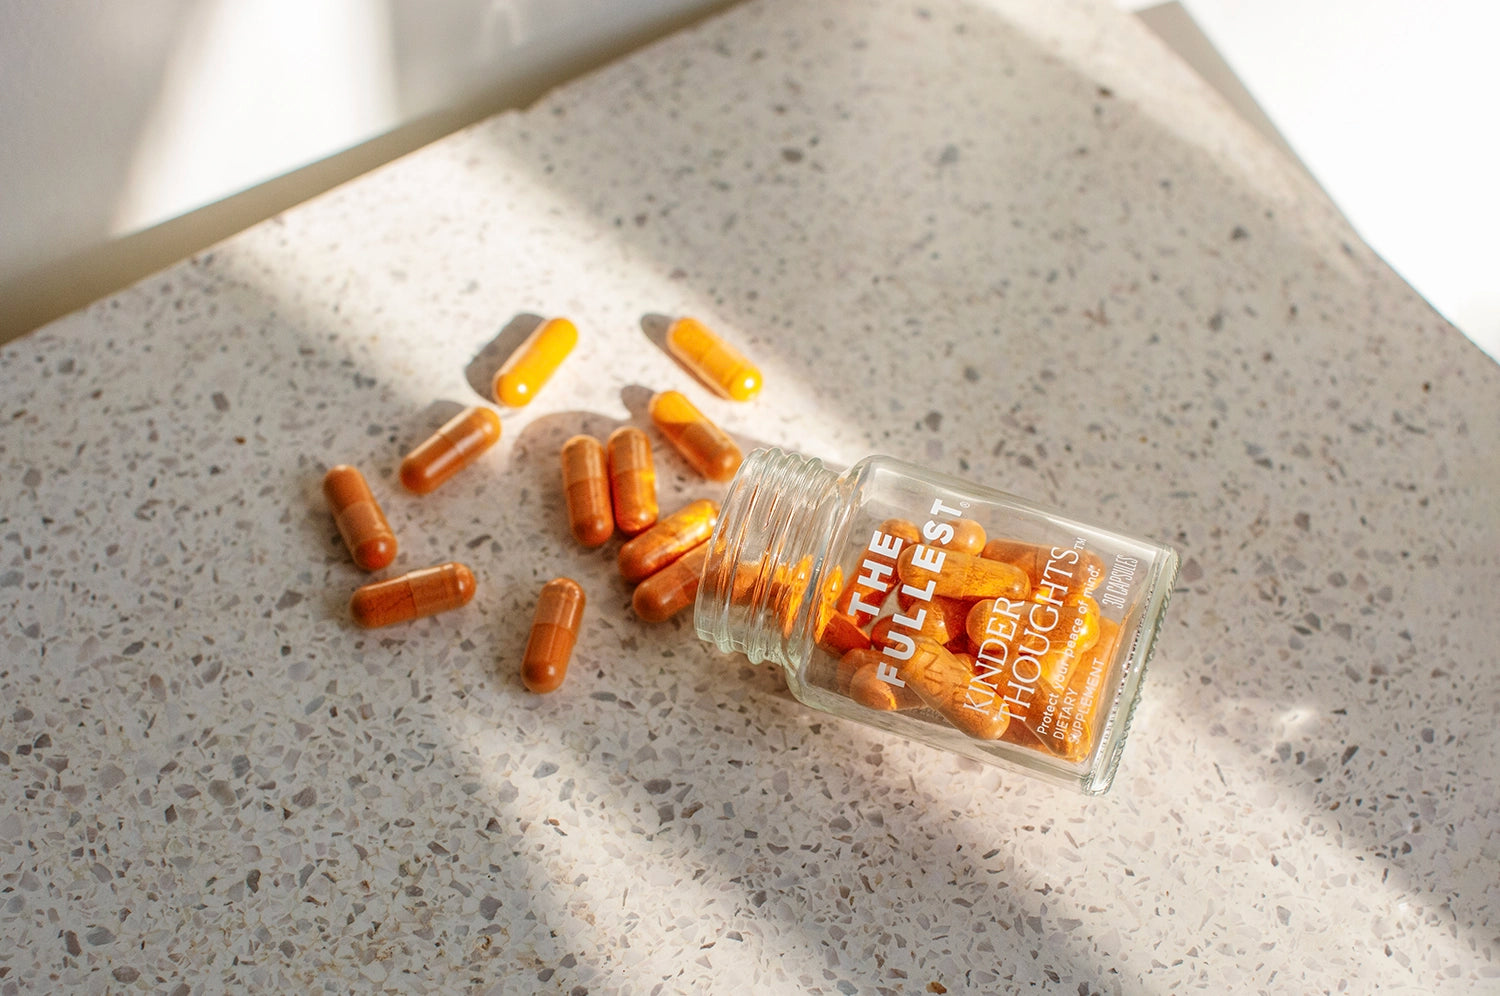 The Fullest's Kinder Thoughts saffron and turmeric bottle open, with supplements spilled and scattered across the counter.